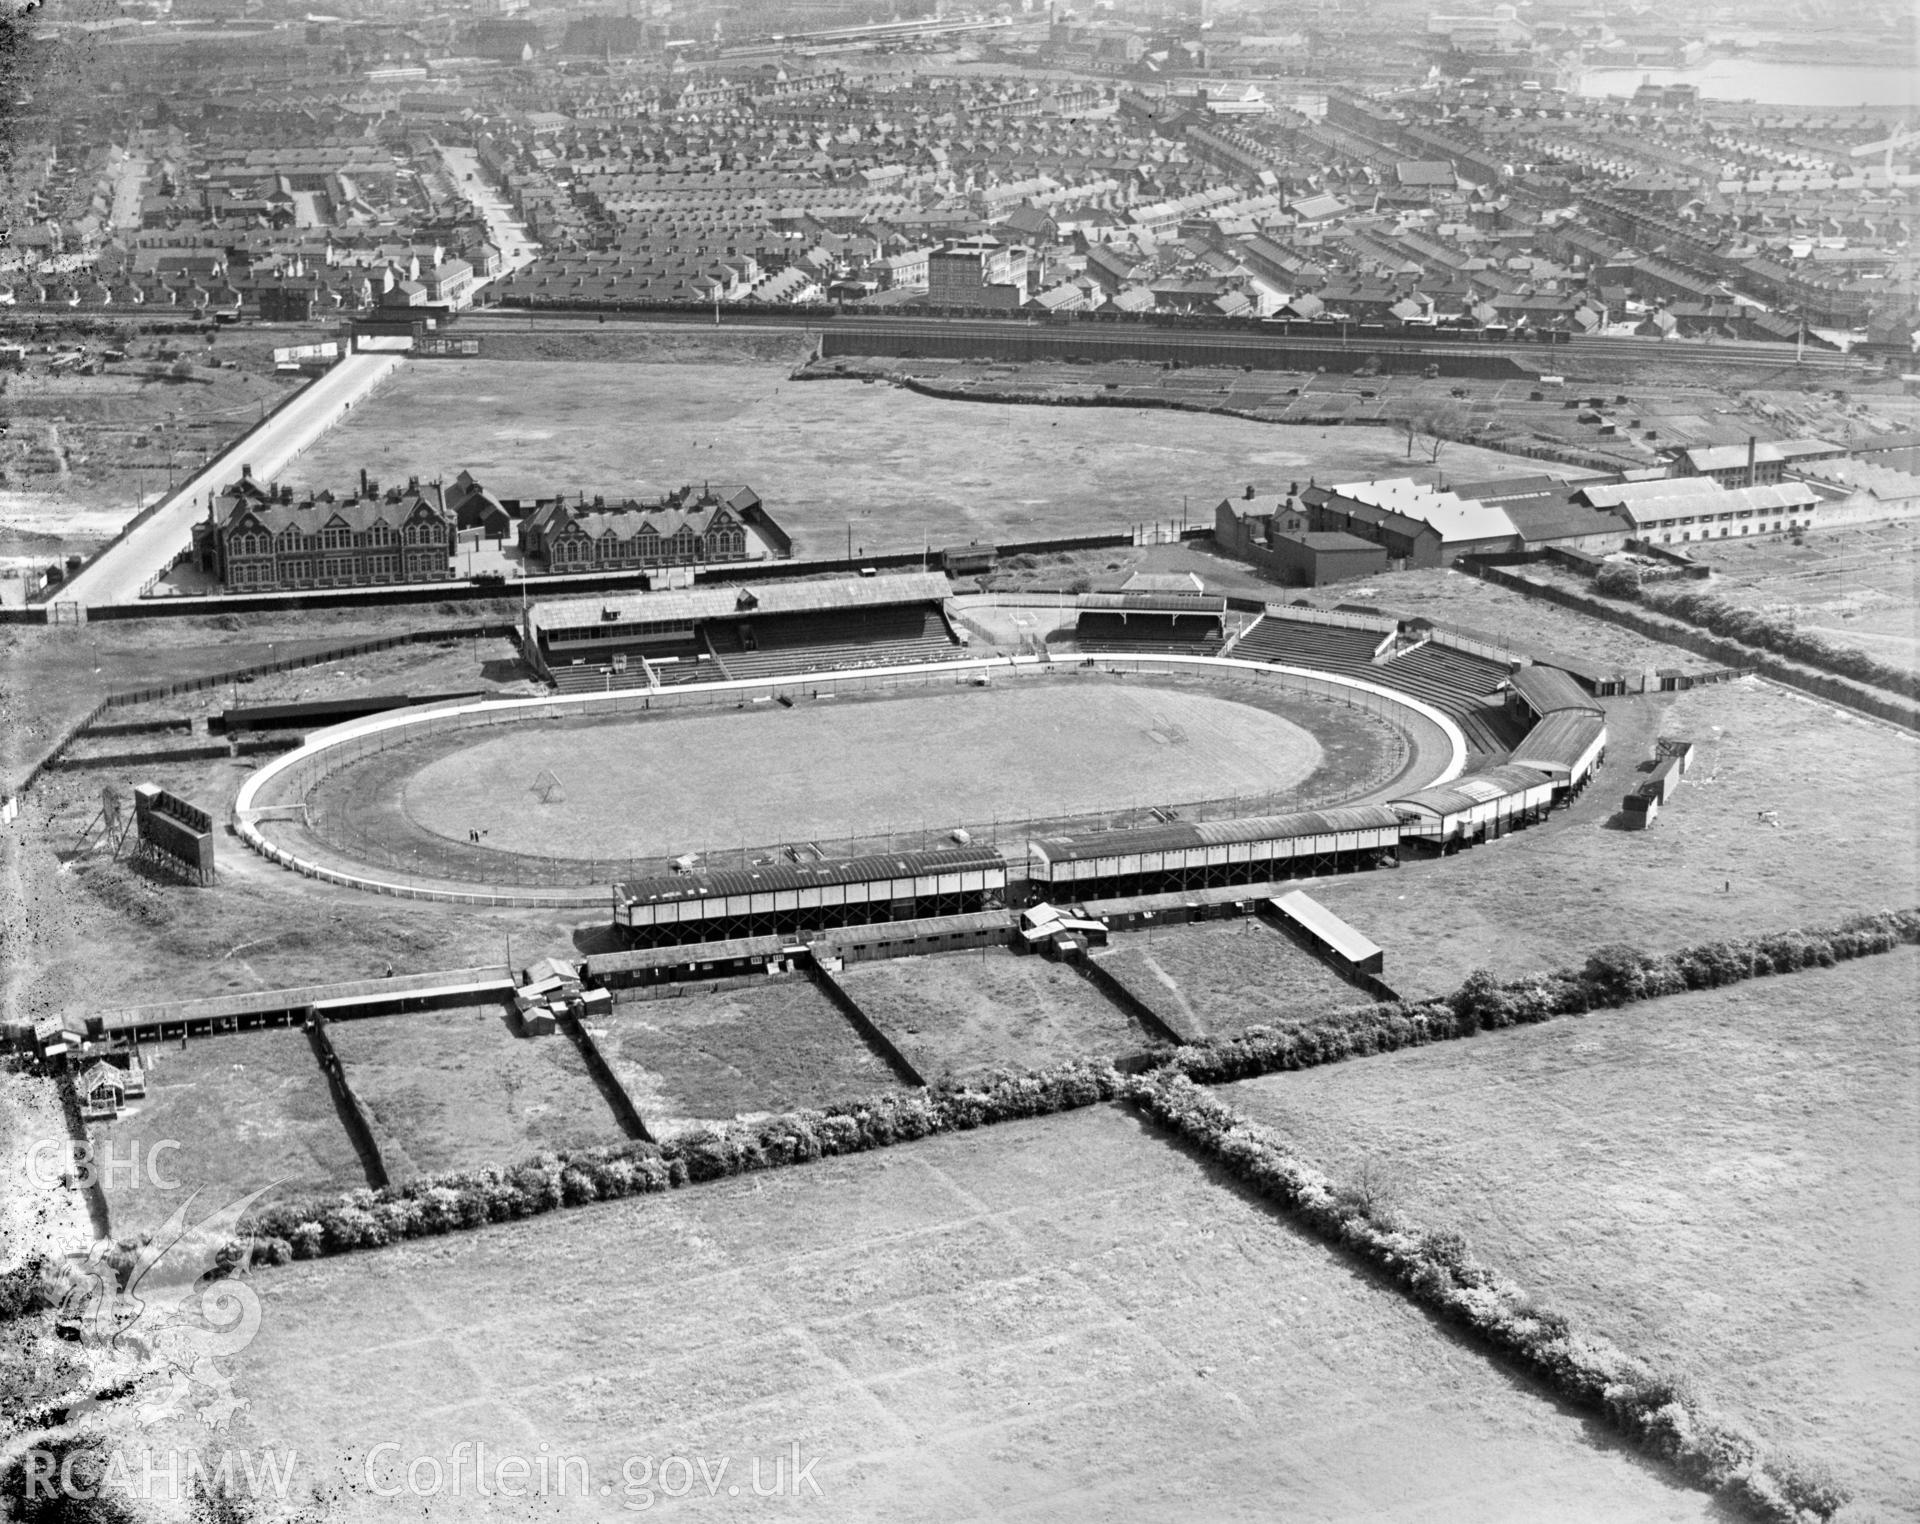 View of greyhound racing track, Sloper Road, Cardiff showing Ninian Park Schools, oblique aerial view. 5?x4? black and white glass plate negative.